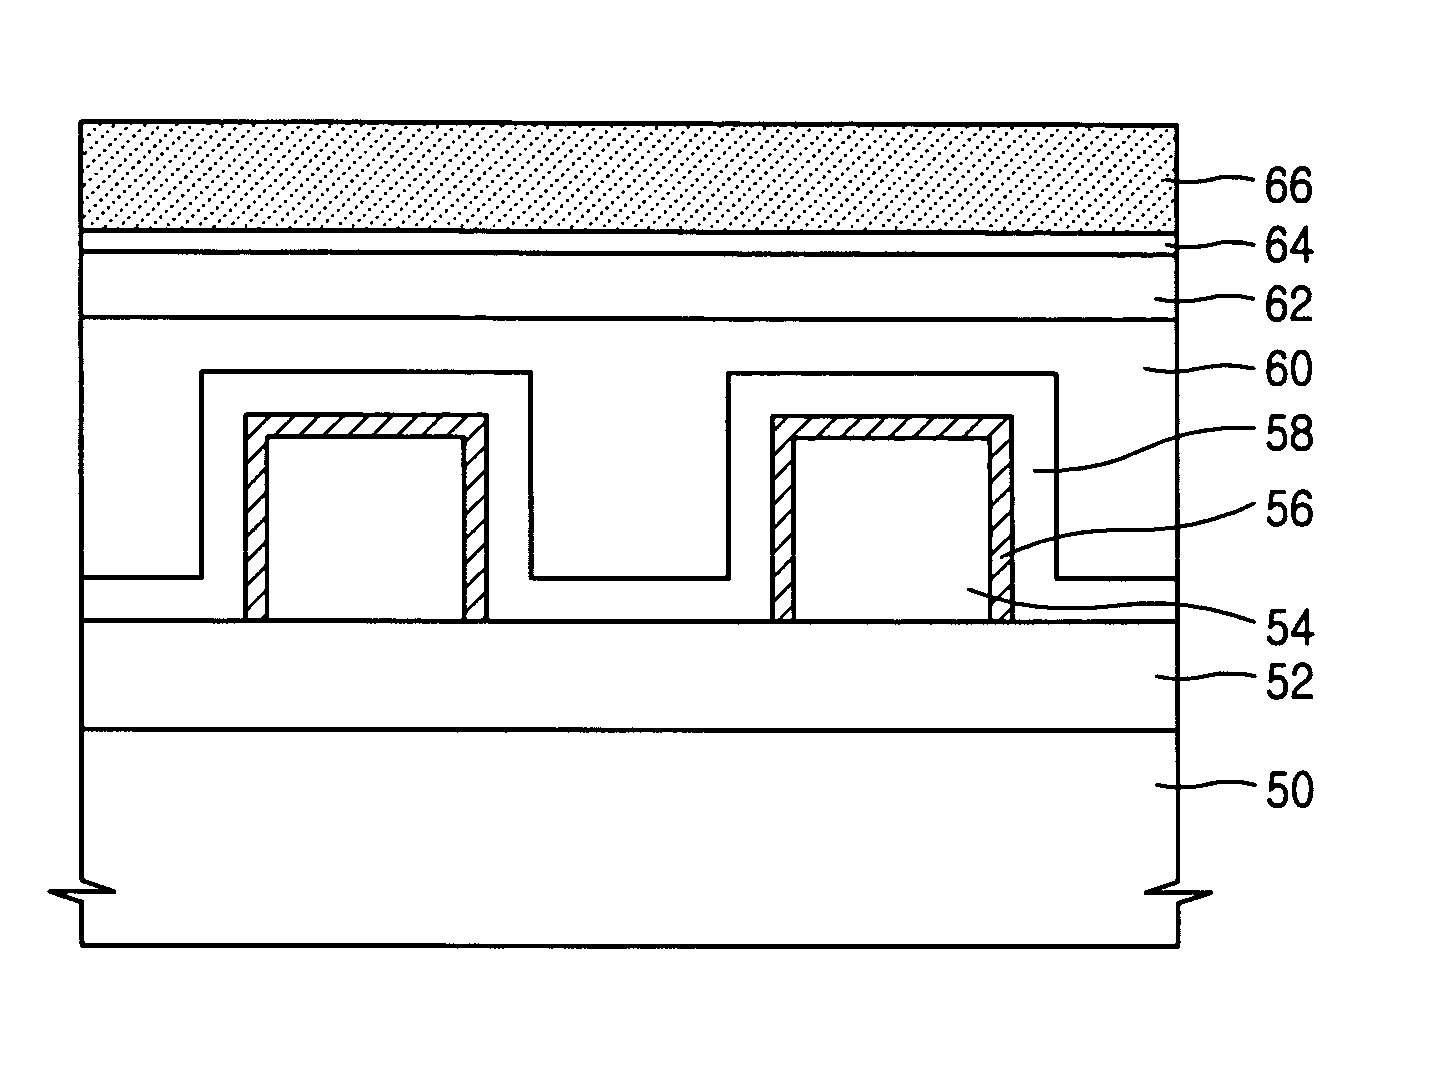 Metal oxide semiconductor (MOS) transistor including a planarized material layer and method of fabricating the same